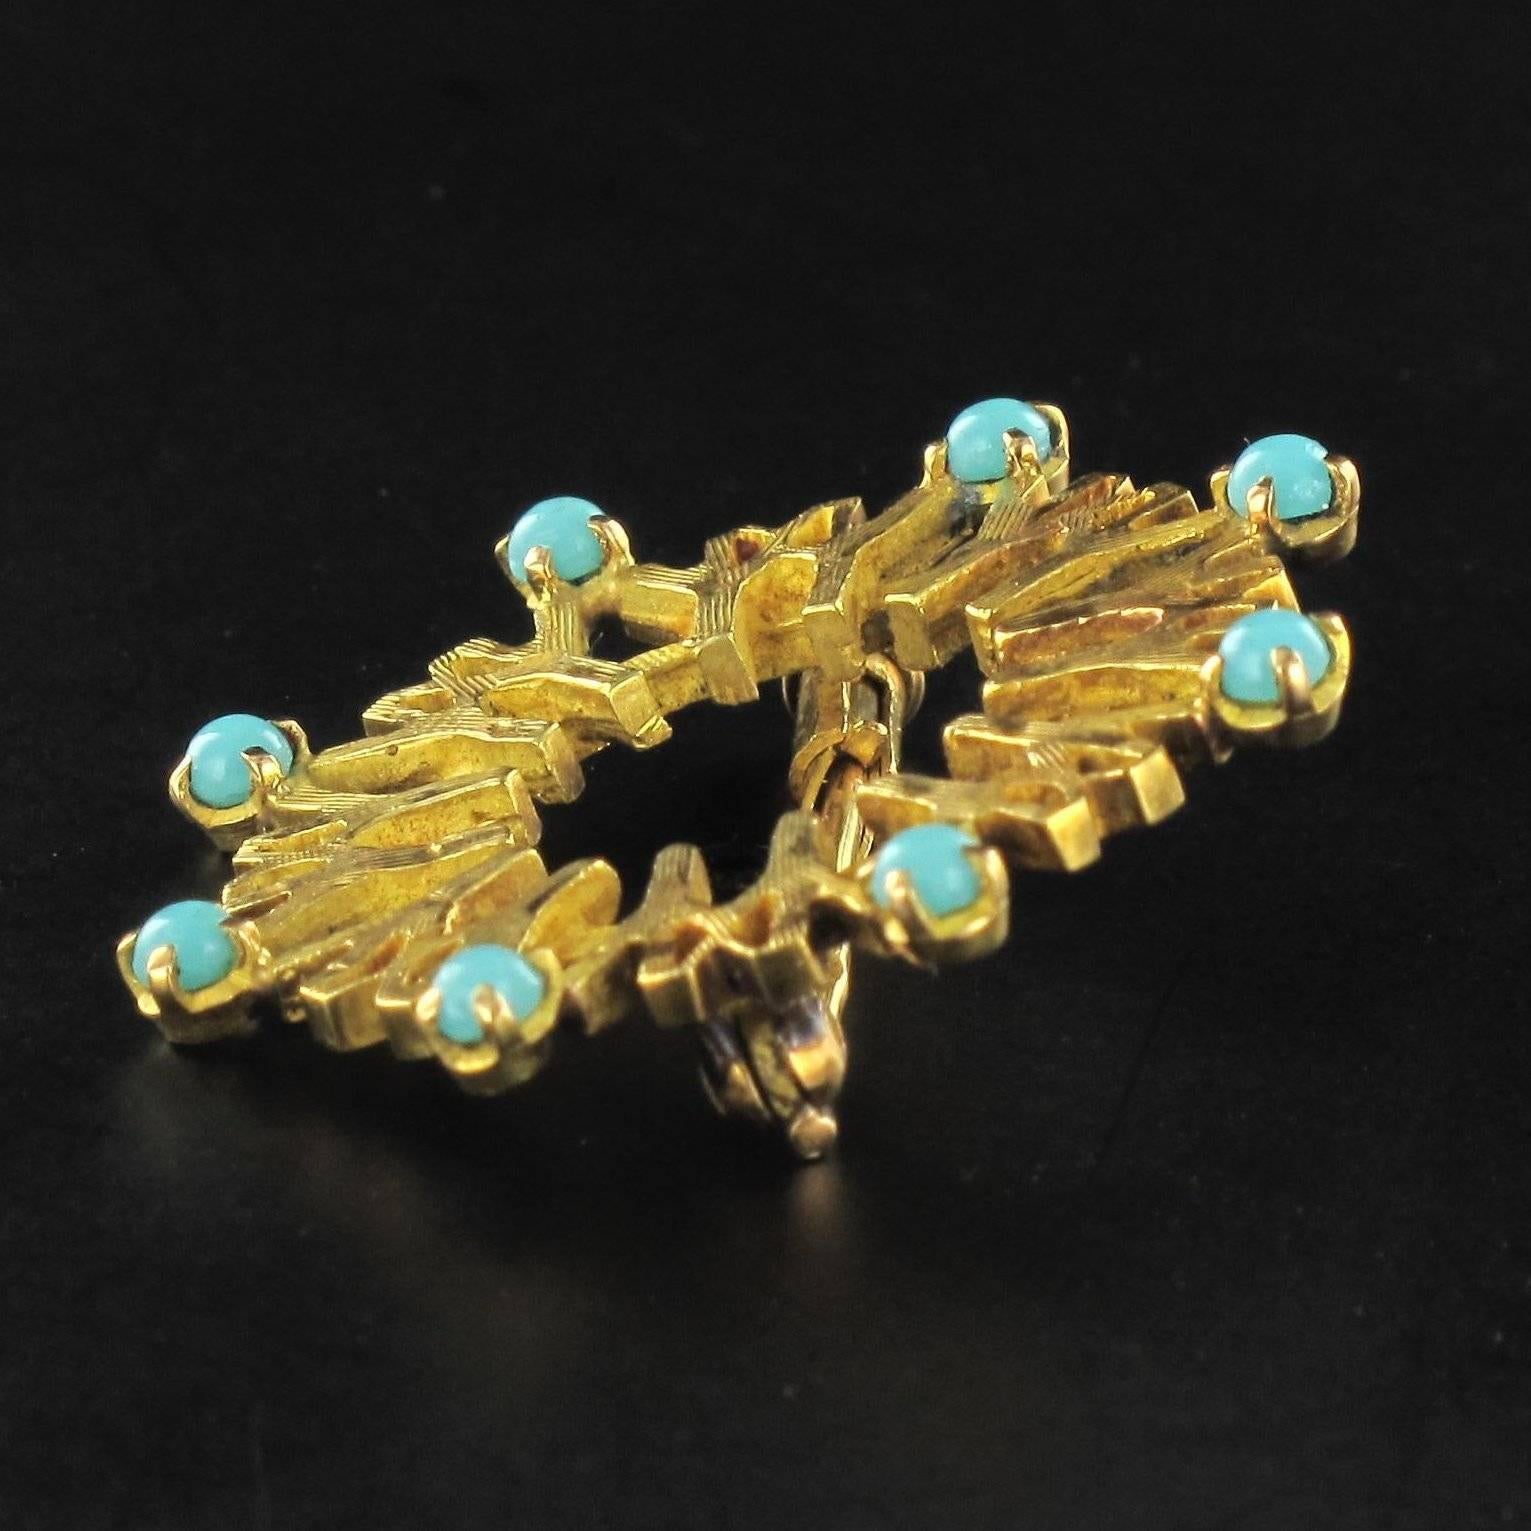 1967 Montreal Universal Exhibition Turquoise Gold Brooch 1